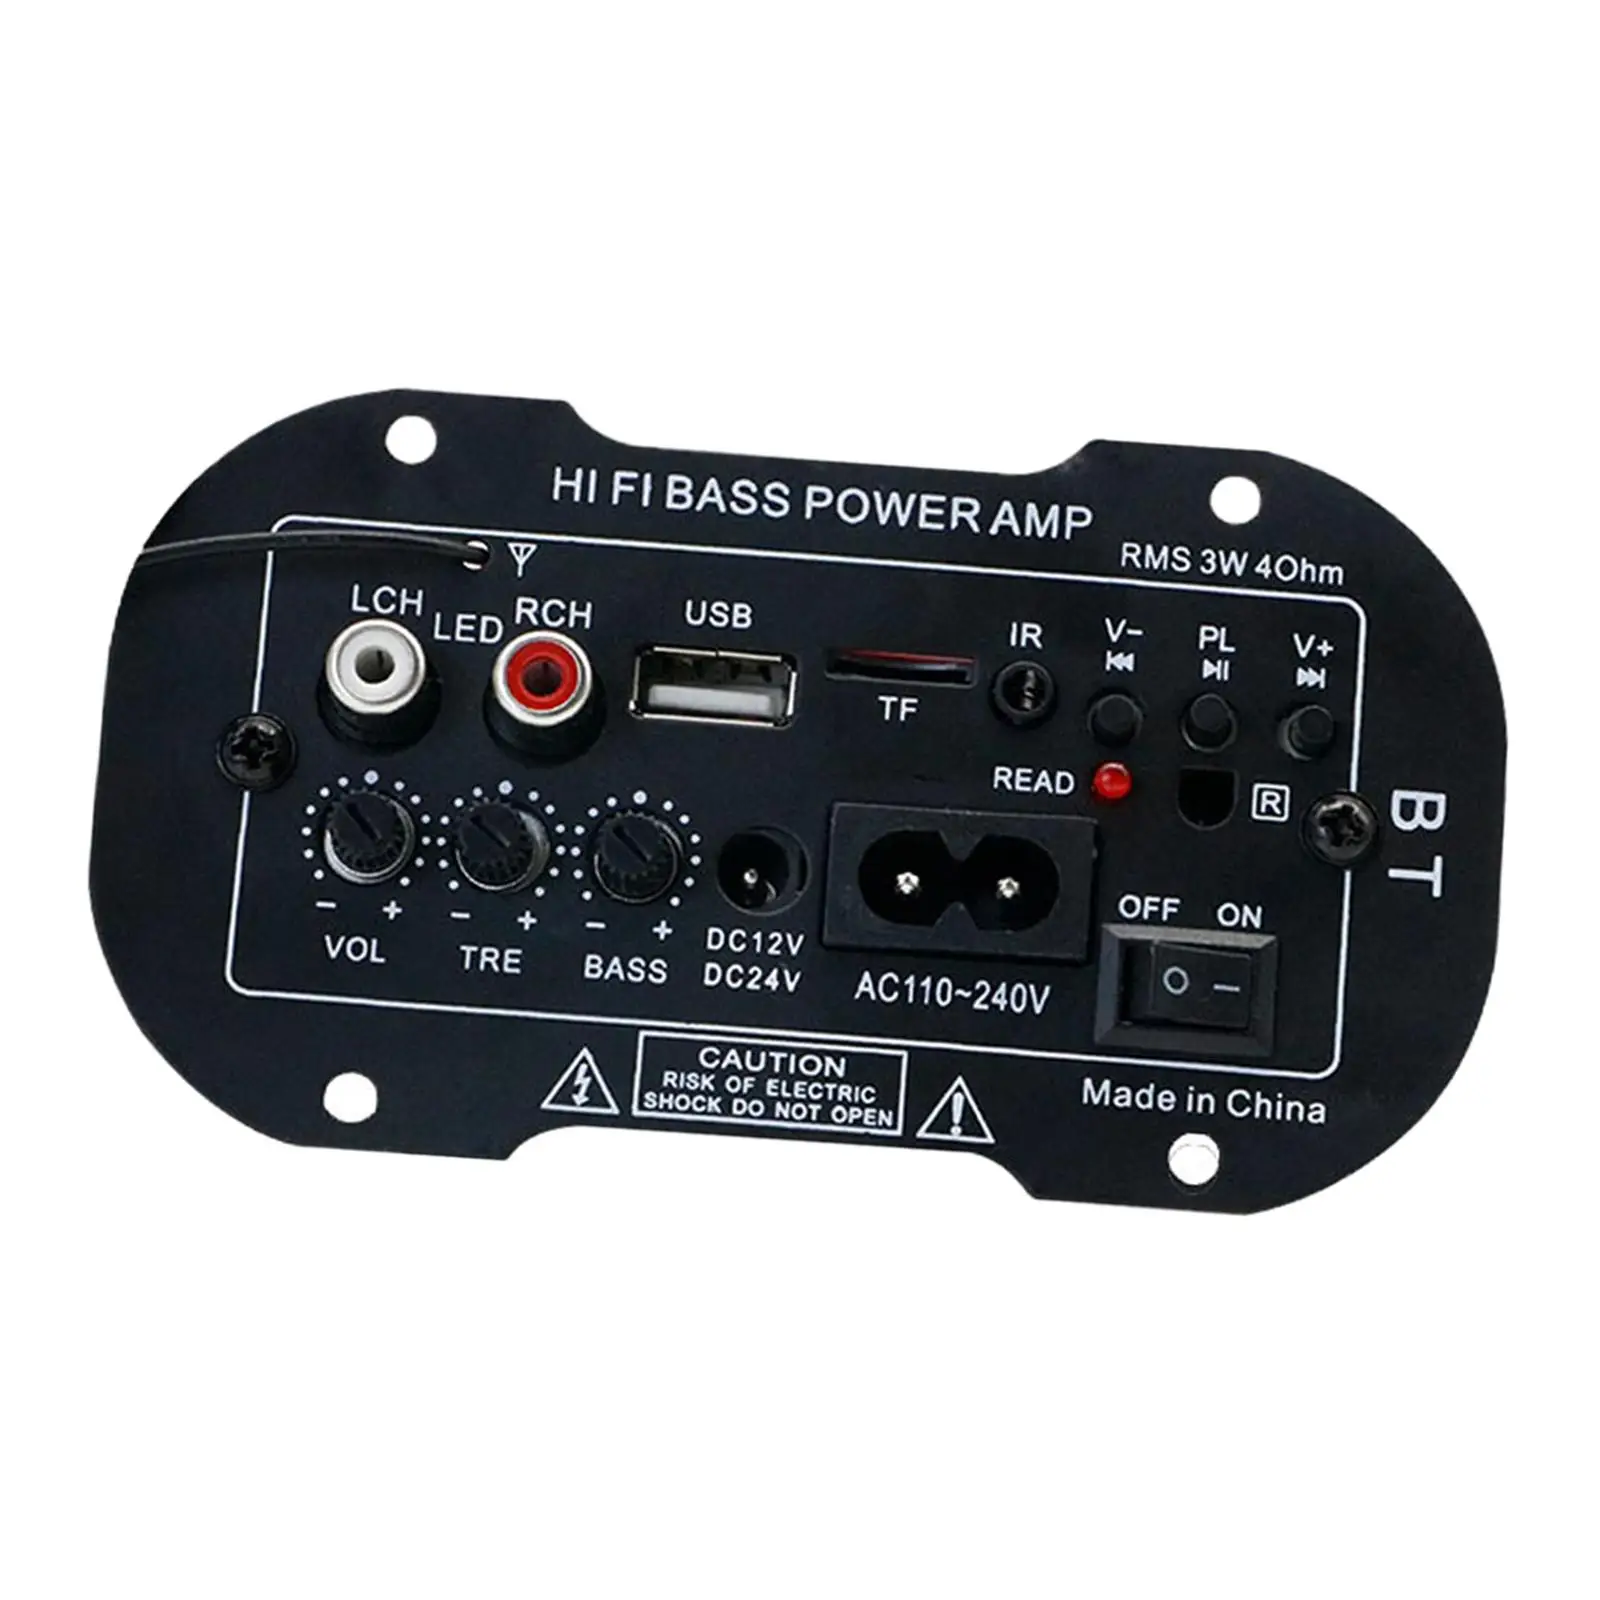 Subwoofer Power Amplifier Board US Adapter High Power with Speaker Bass Multifunction HiFi with Remote Control for Speakers DIY